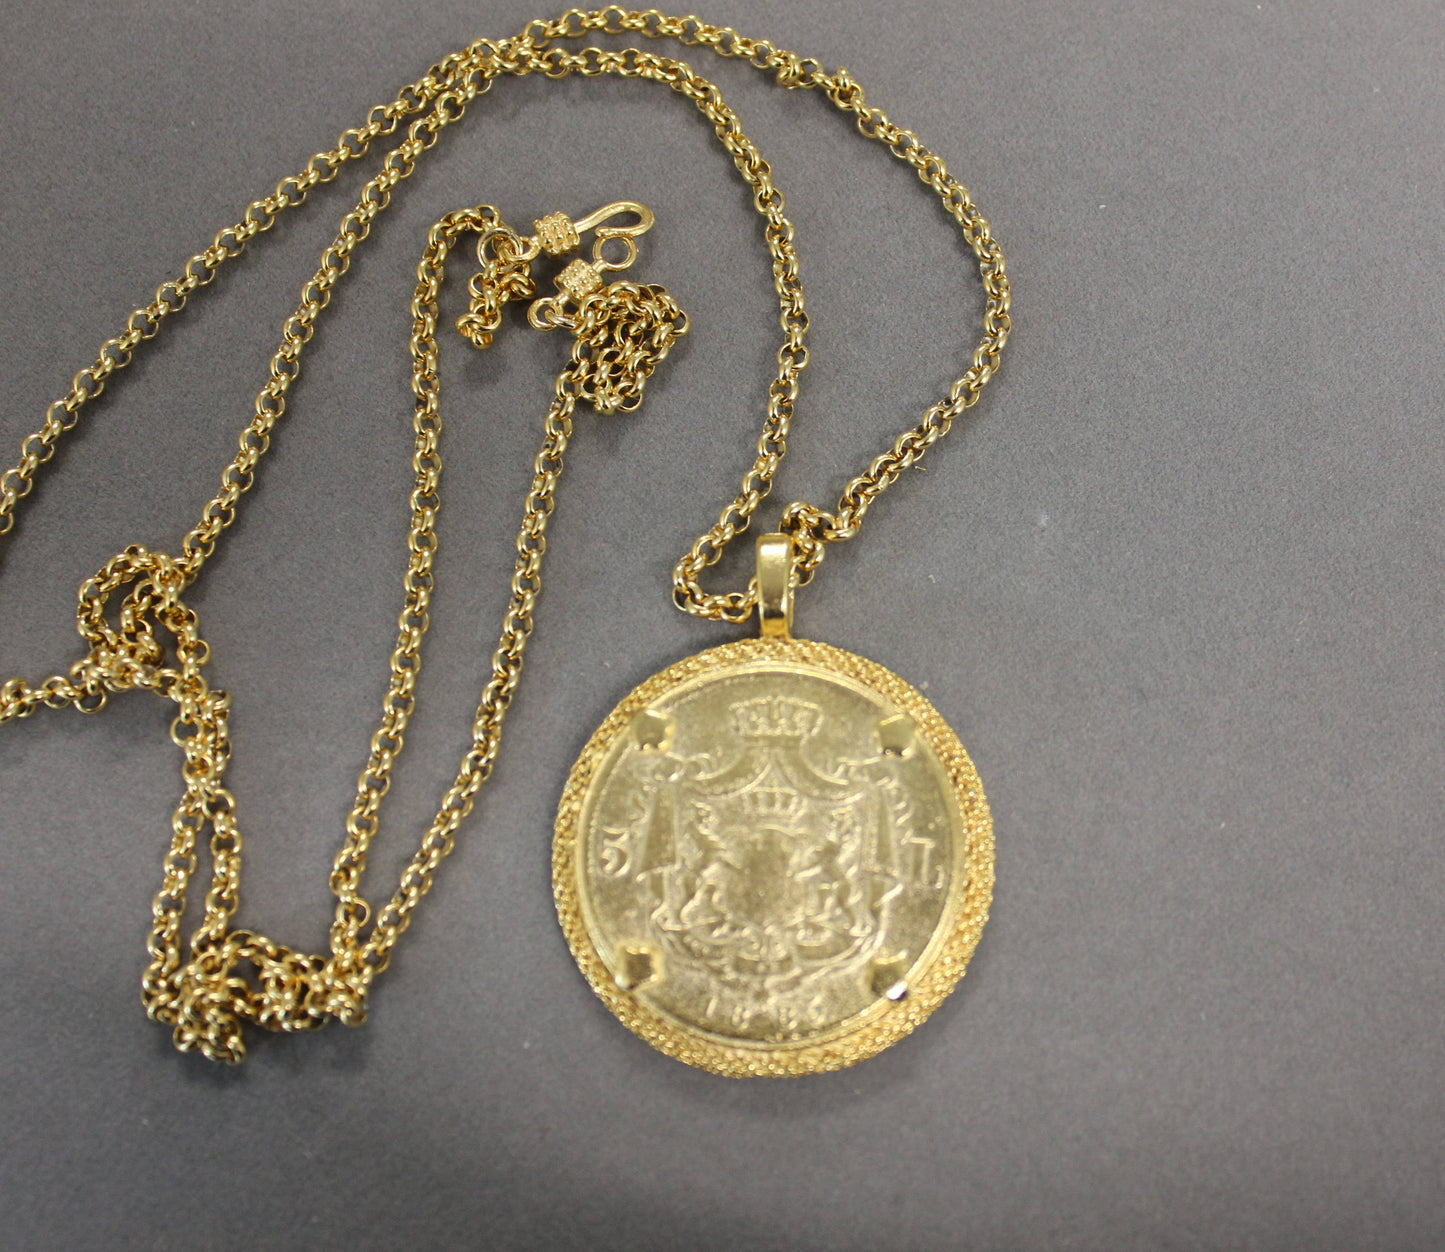 French Inspired Necklace Vintage Coin